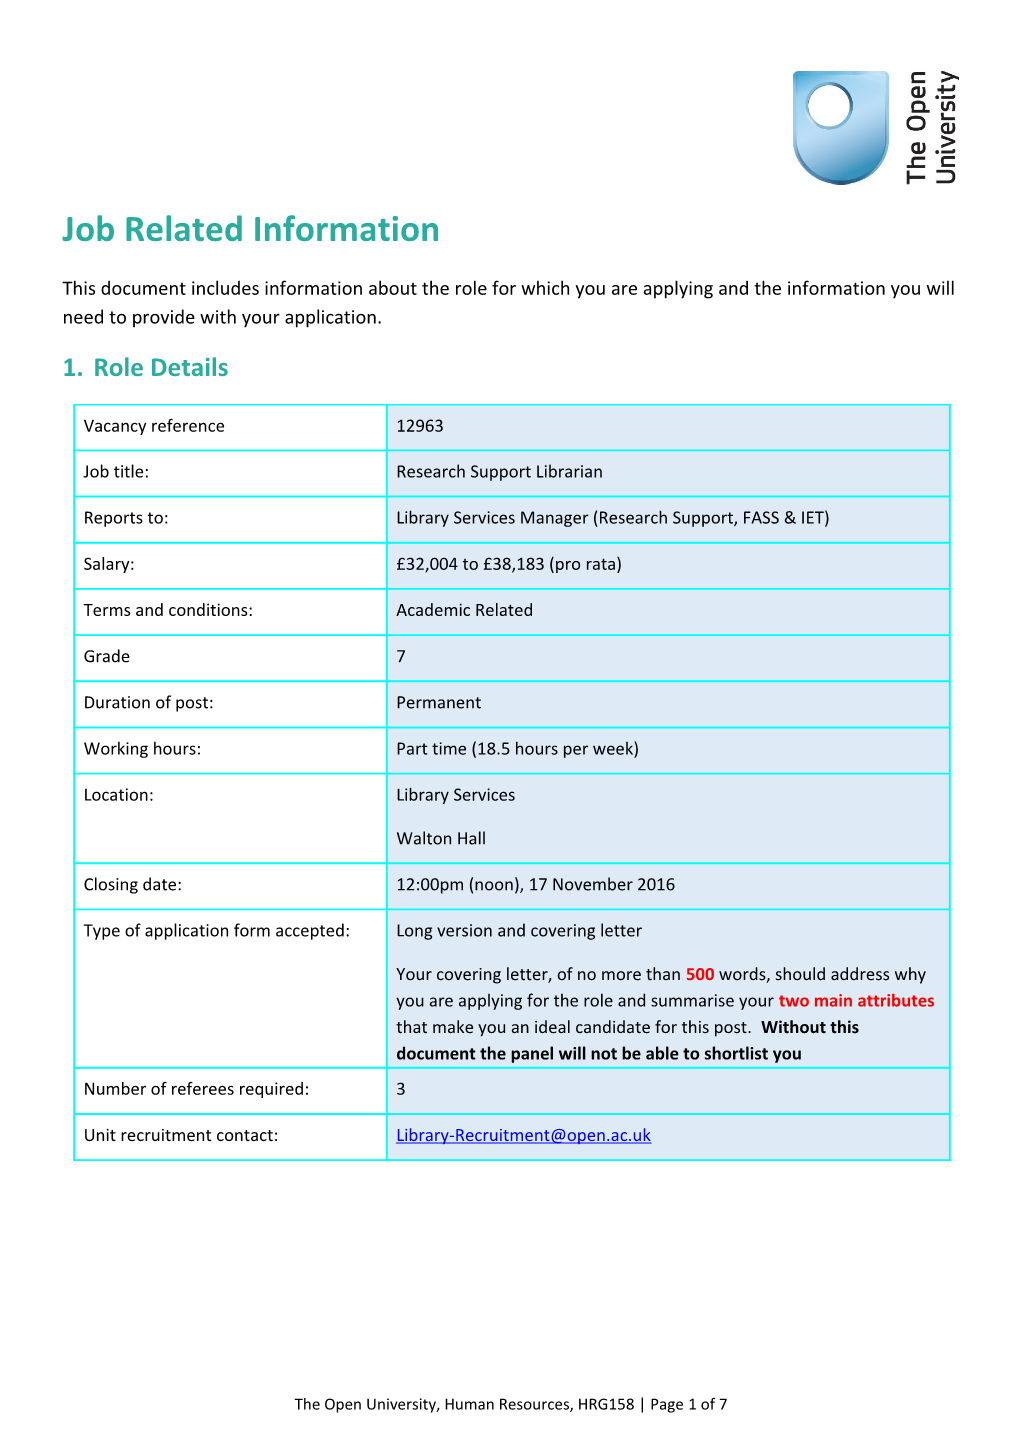 Job Related Information Template HRG158